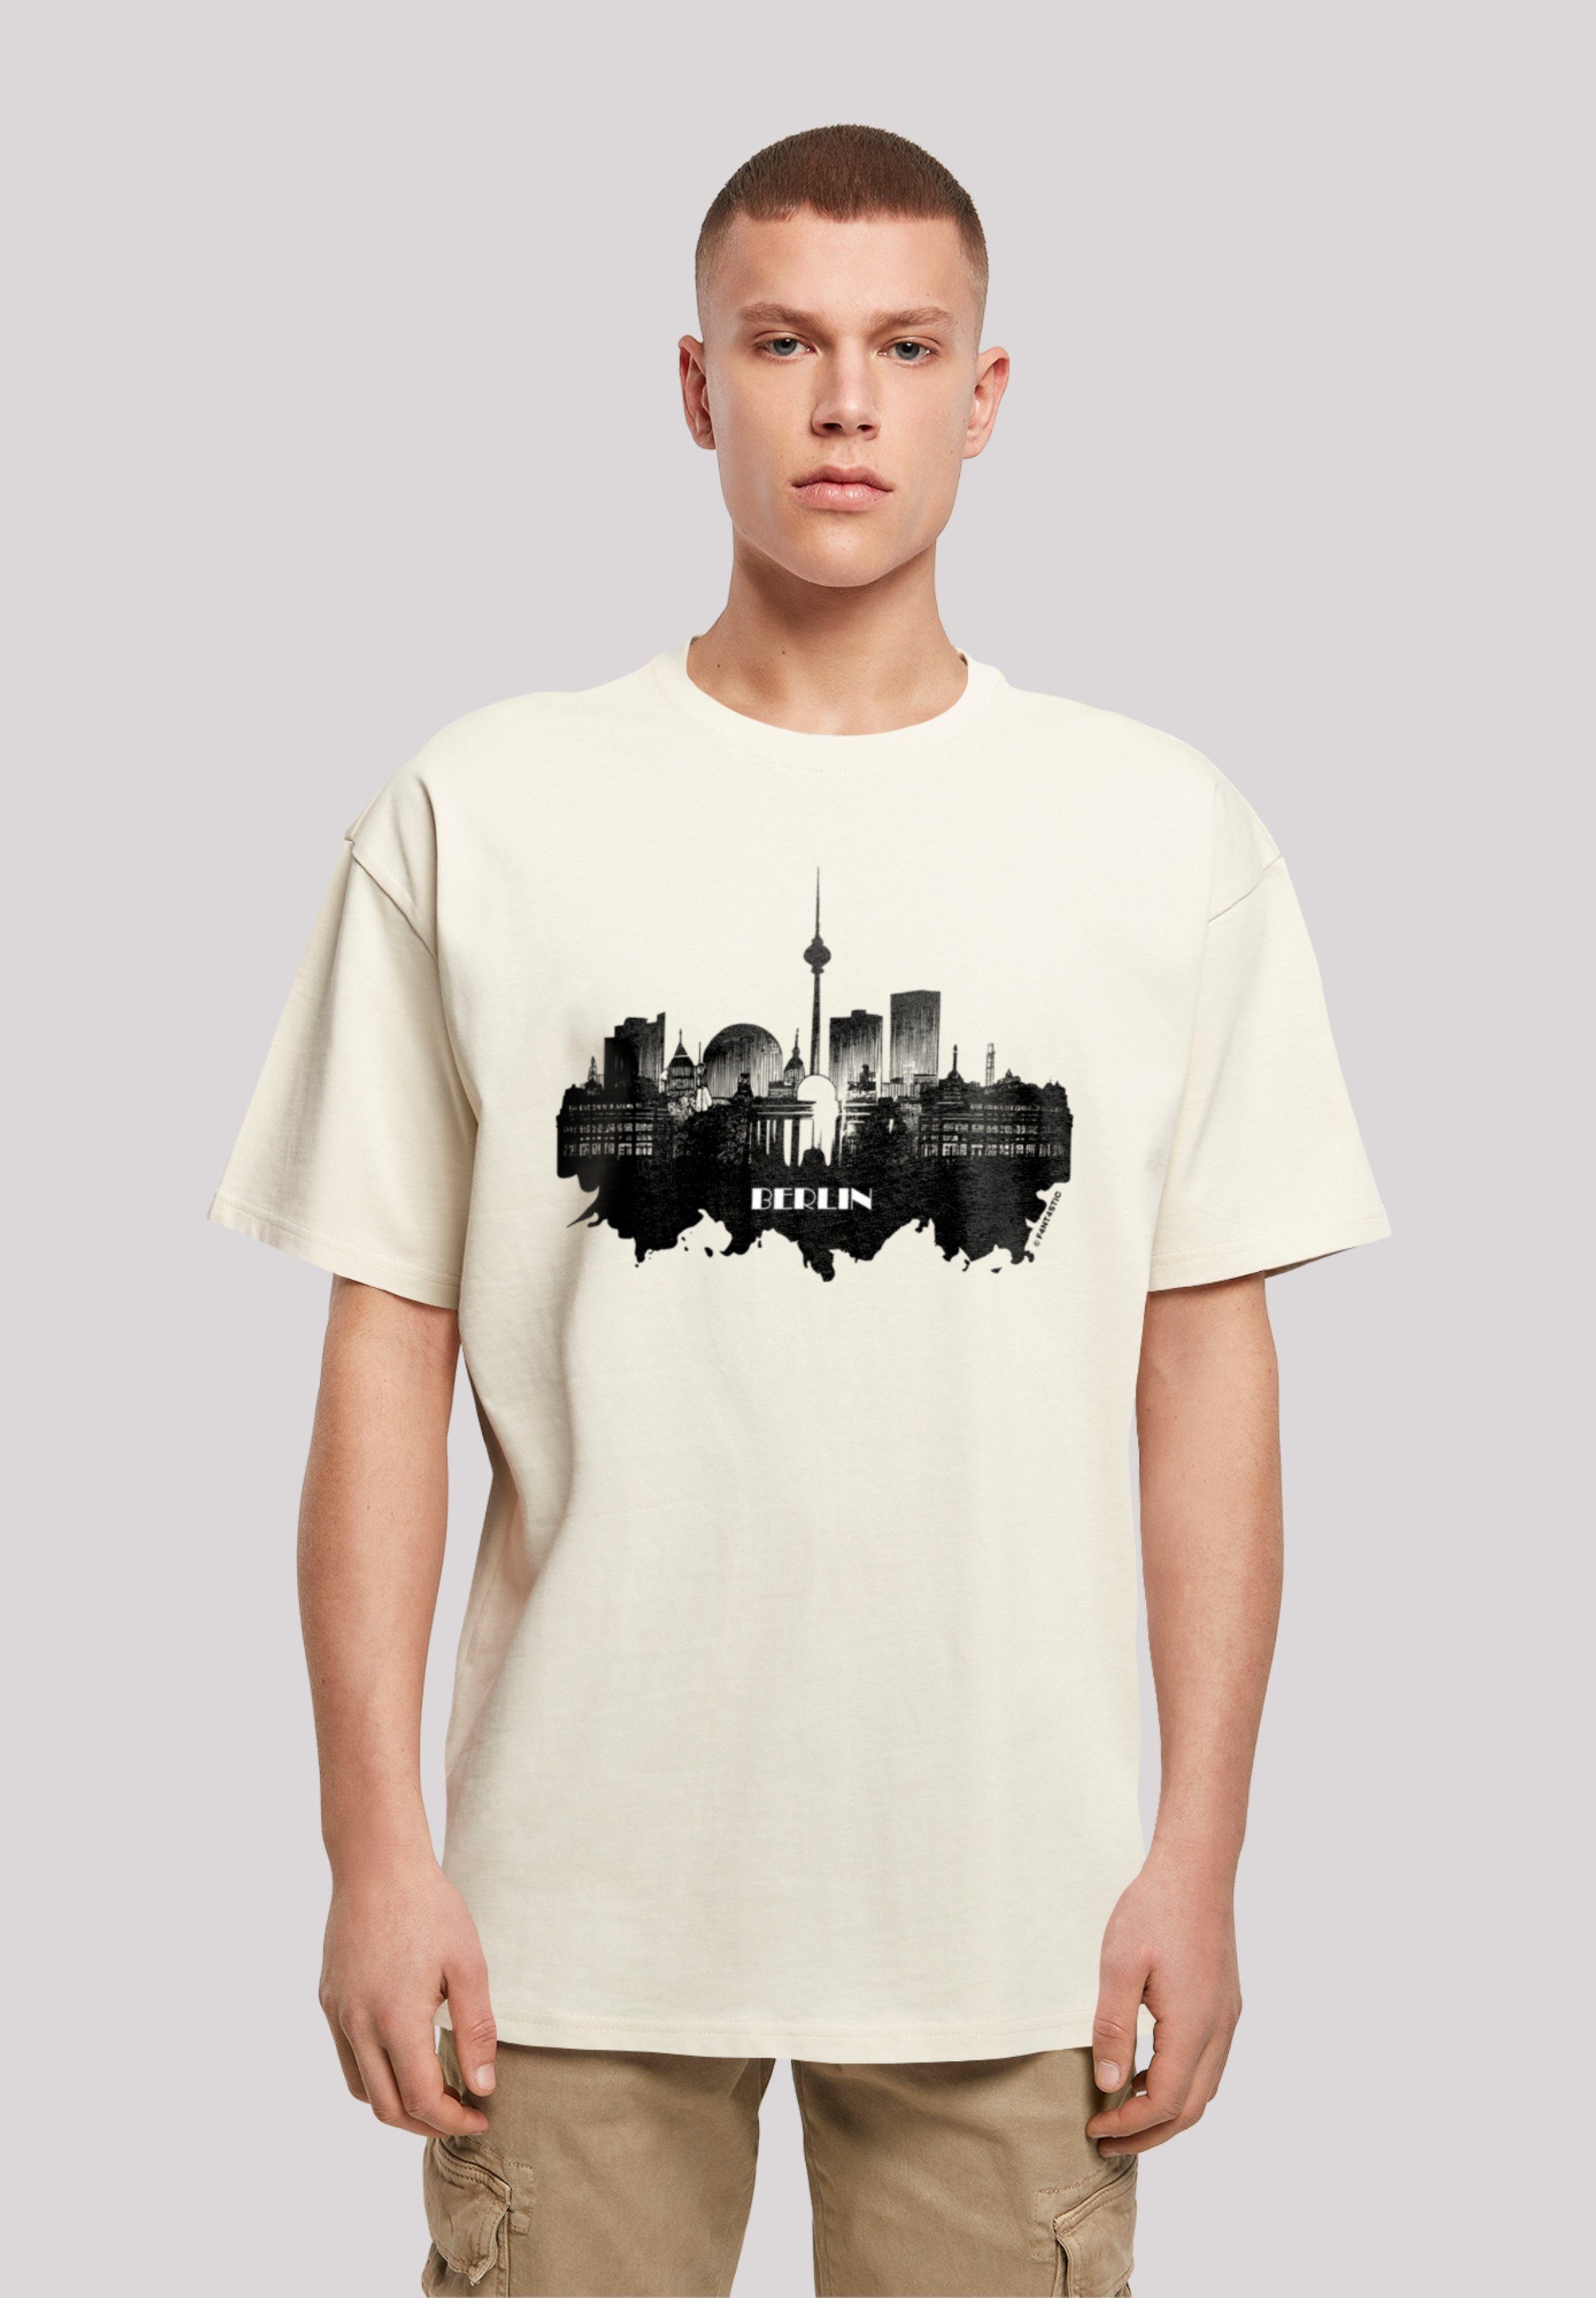 - T-Shirt Collection Print sand F4NT4STIC Berlin Cities skyline